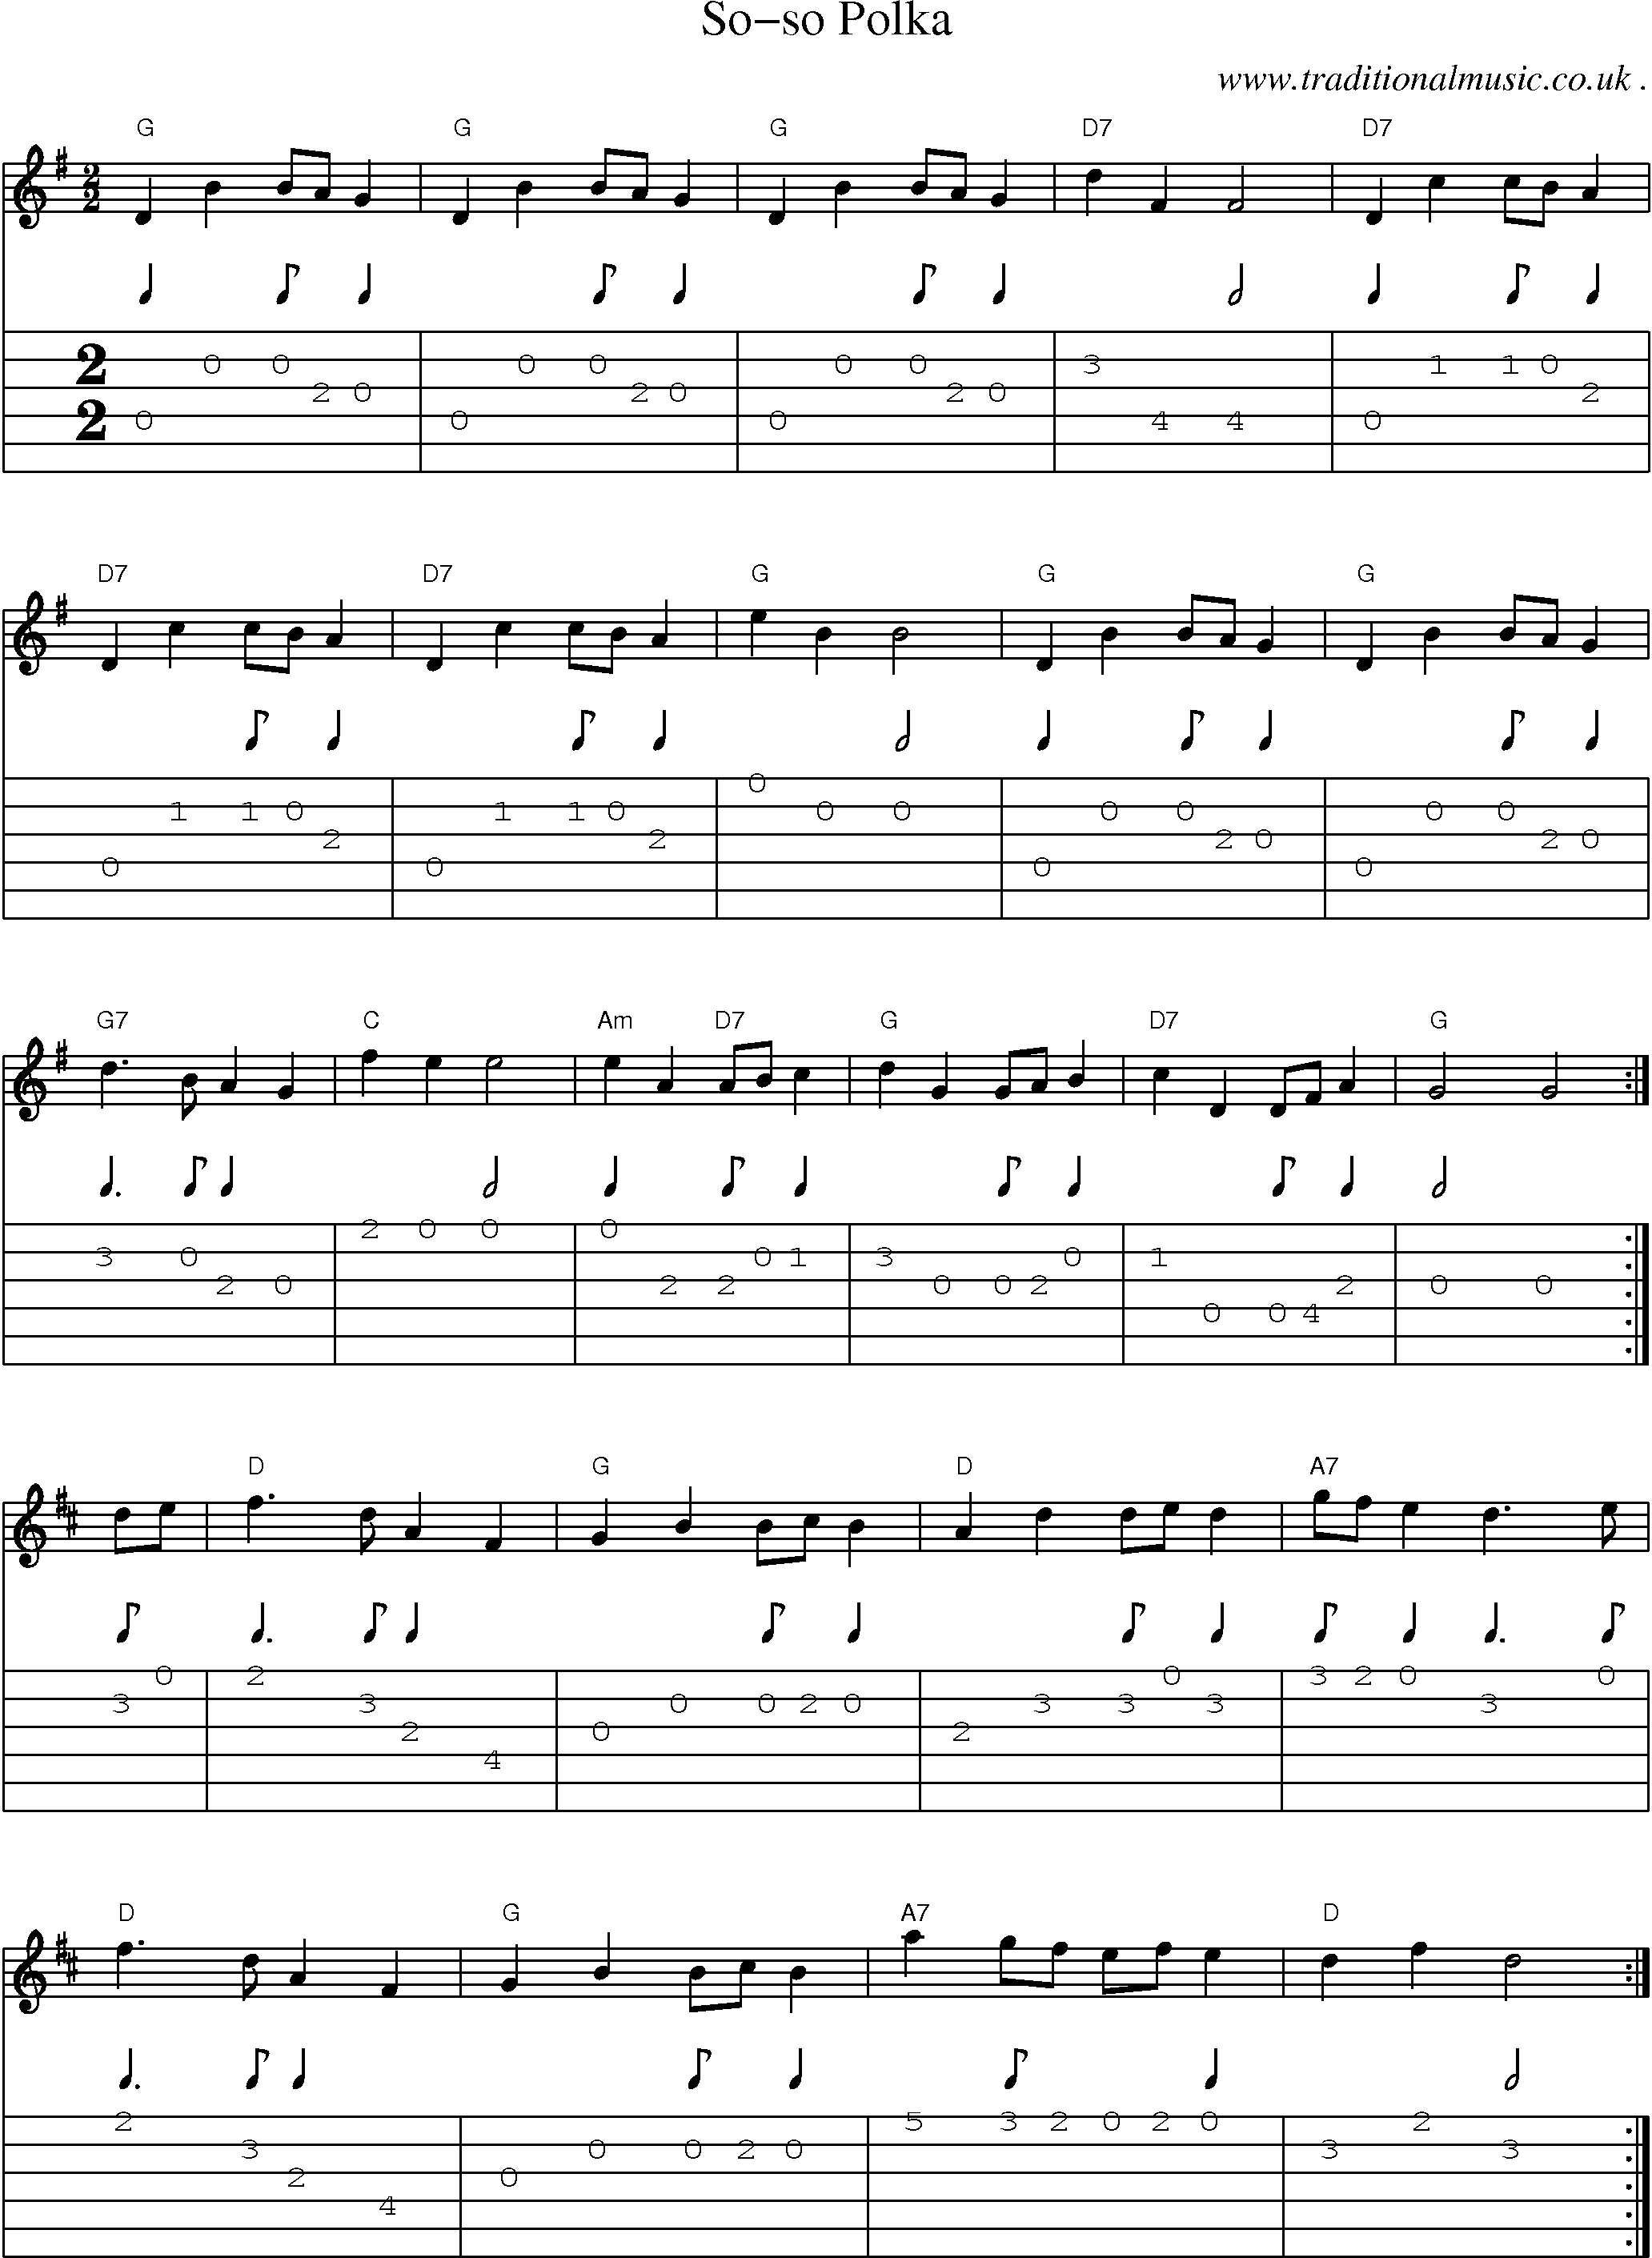 Sheet-Music and Guitar Tabs for So-so Polka